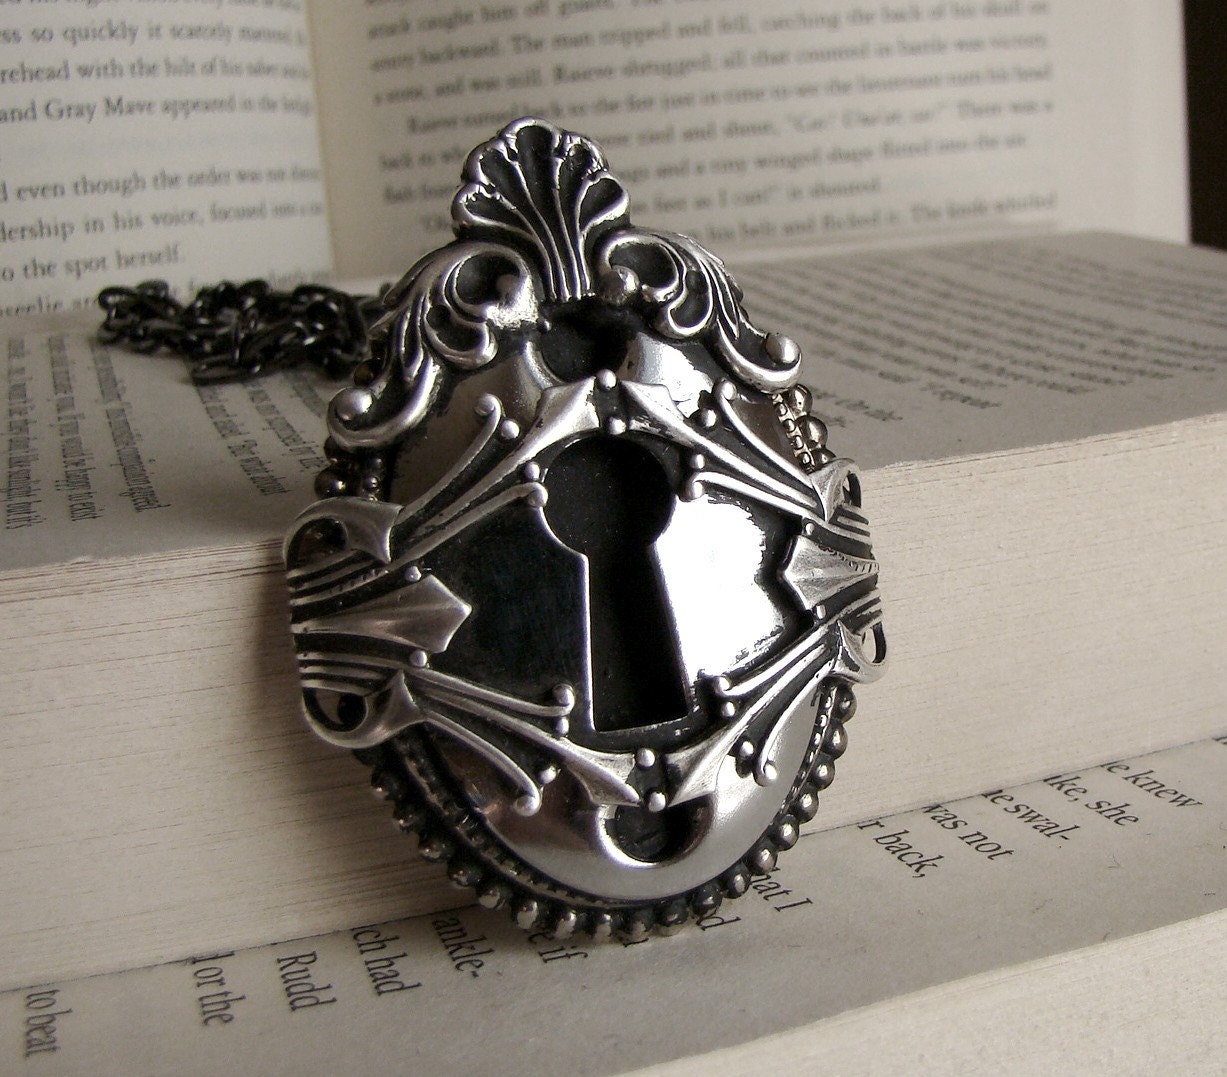 Havoc The Keeper of Order - A Steampunk Inspired Neo-Victorian KeyHole Necklace